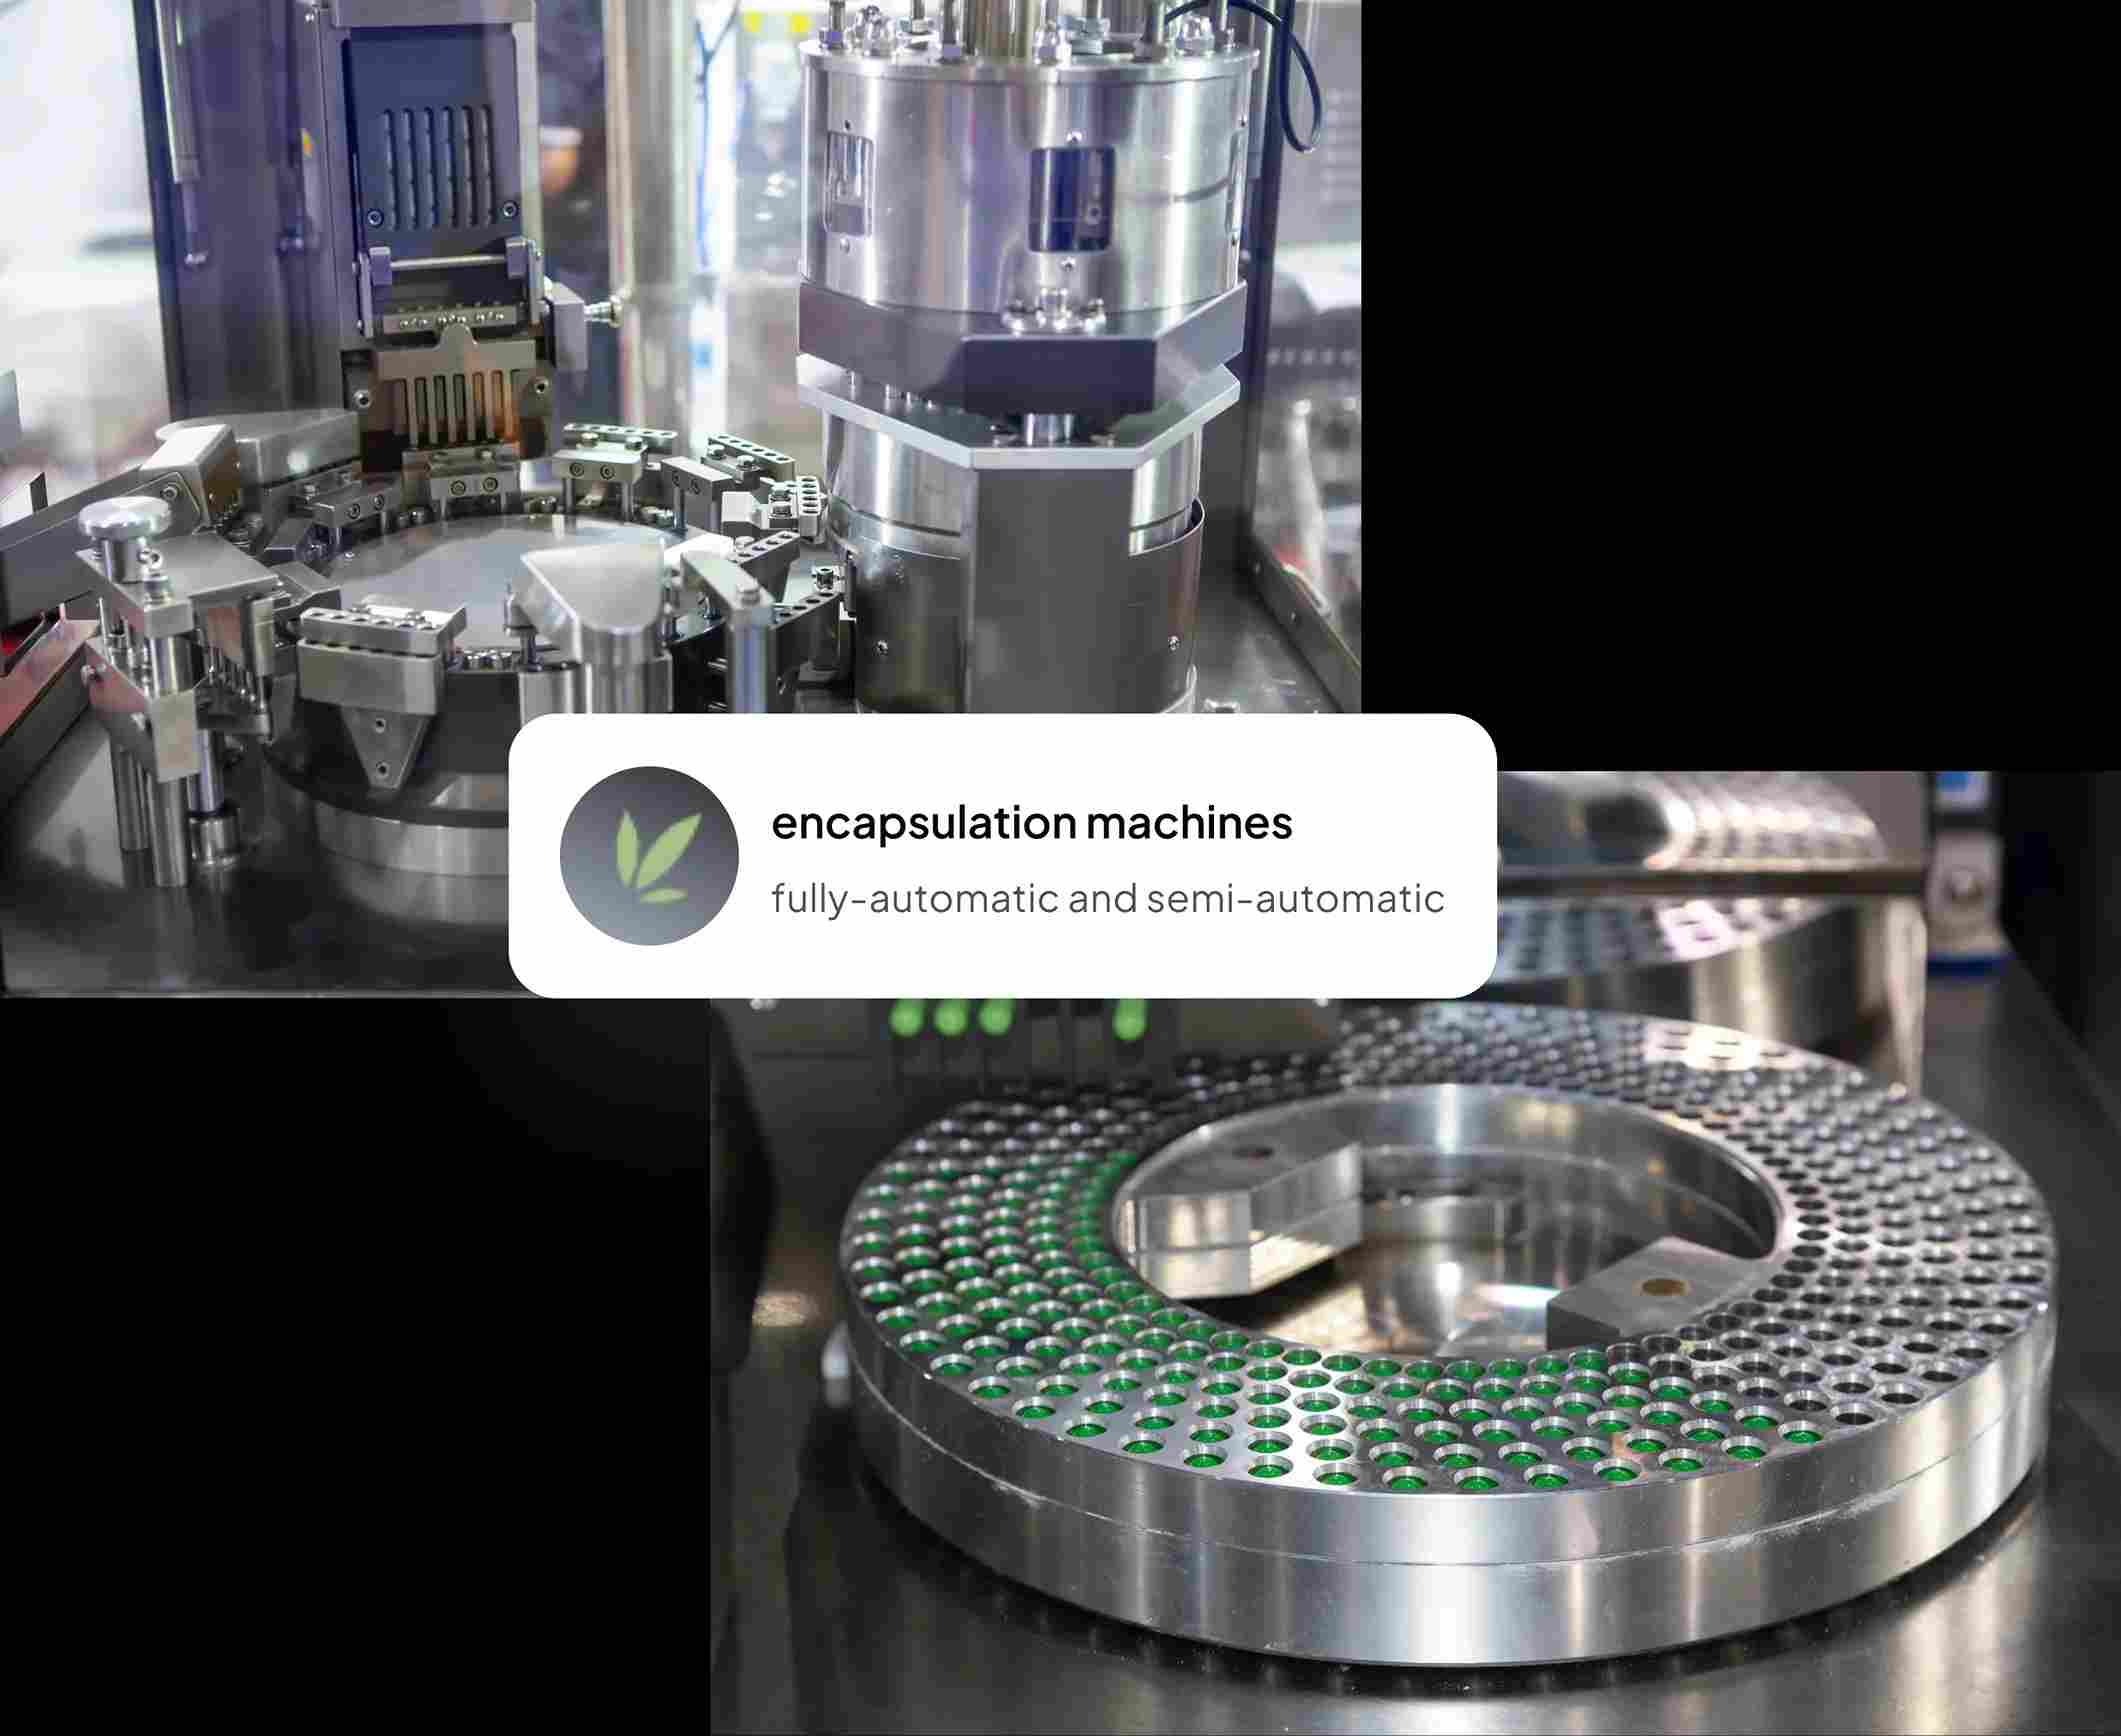 Fully and semi-automatic encapsulation machines at VBC